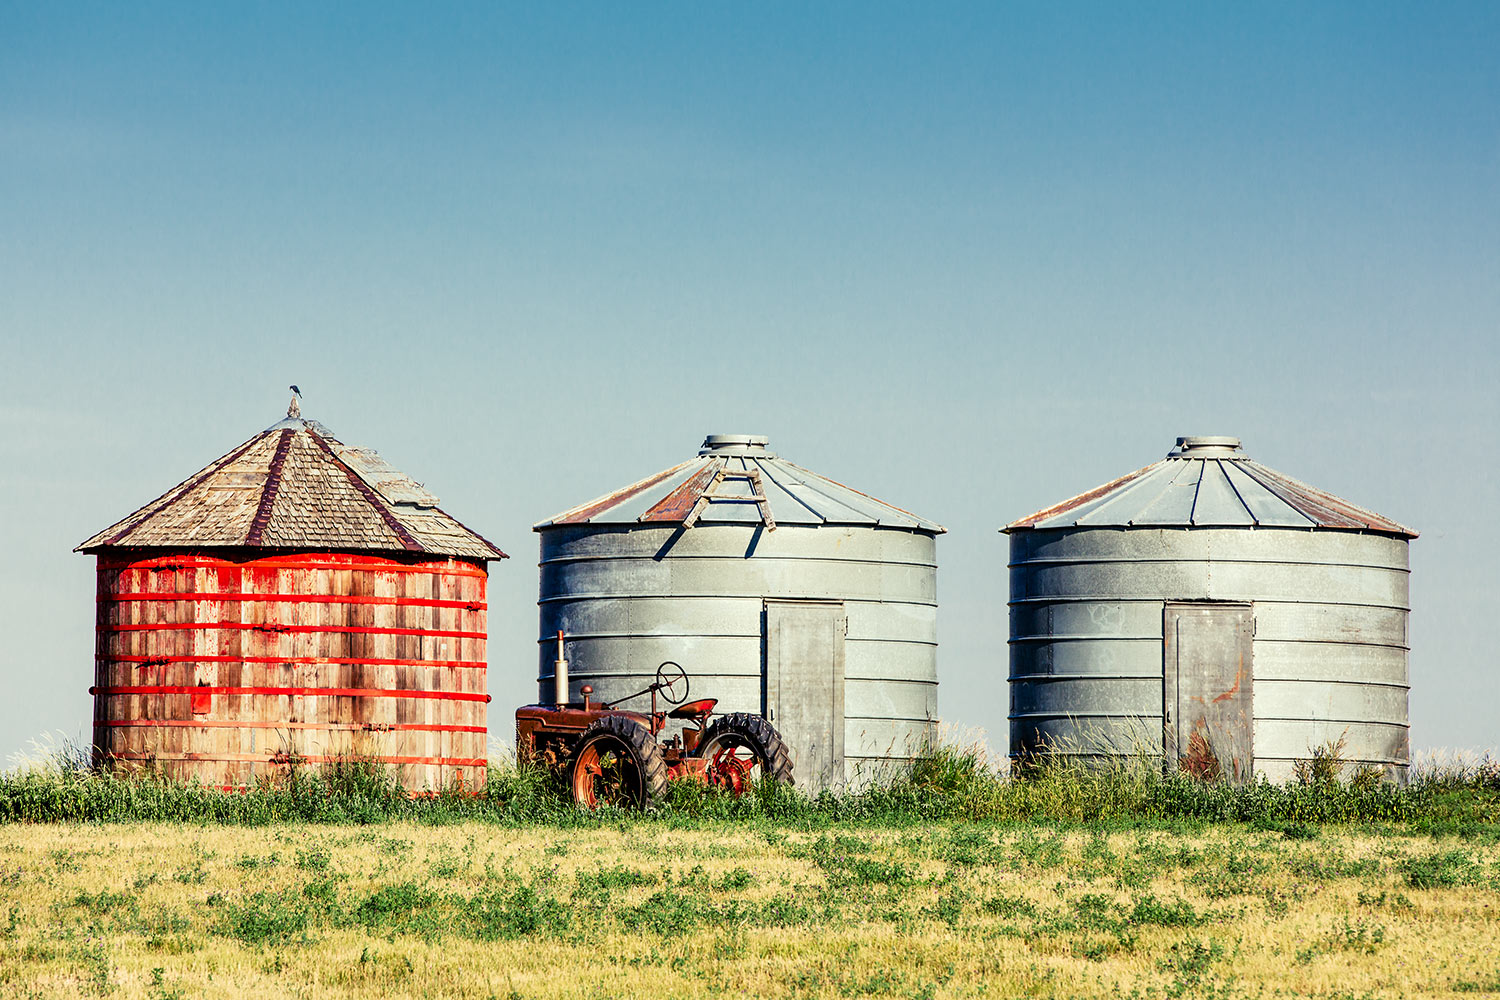 Three bins and an old antique tractor sit in the middle of a field near Lewistown, Montana.&nbsp;→ Buy a Print&nbsp;or License Photo